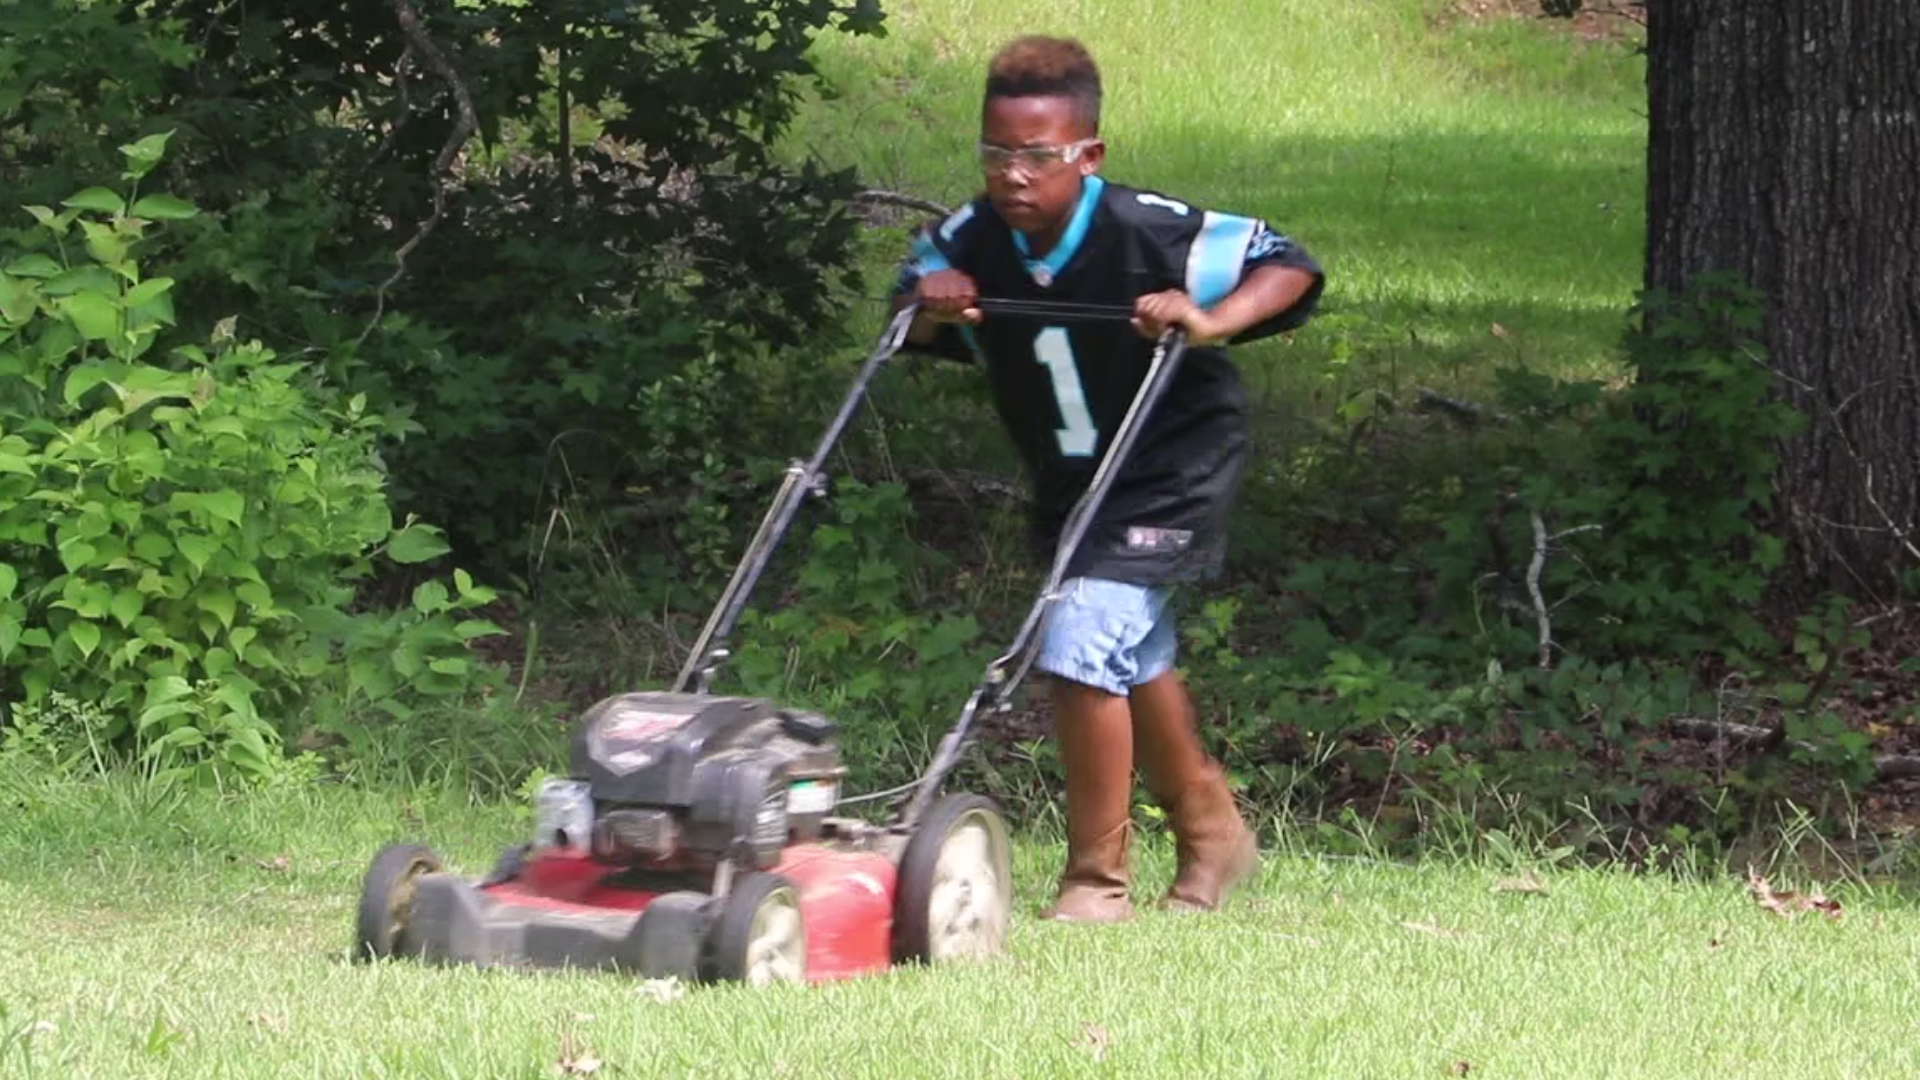 While most kids are playing video games or watching TV with friends this summer, 12-year-old Jaylin is working hard to save money for his own college education.